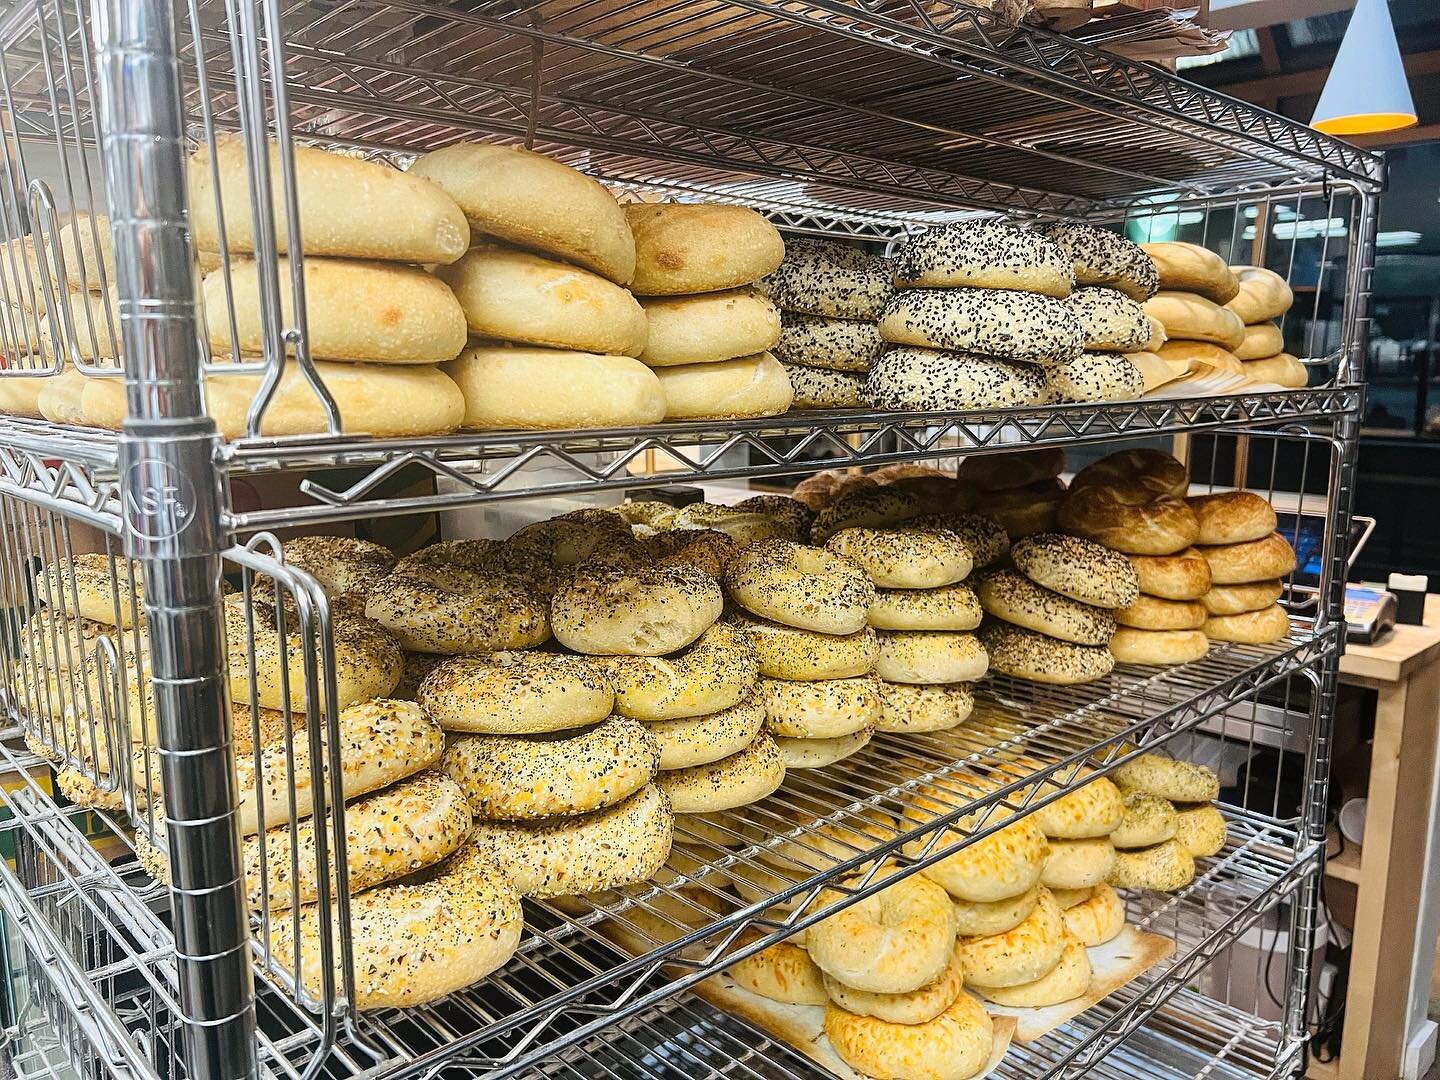 Our stacks of bagels may not be exactly healthy, but we have stacks of bagels so I guess you could say it&rsquo;s a balanced breakfast. Come get one with your choice of schmear today!